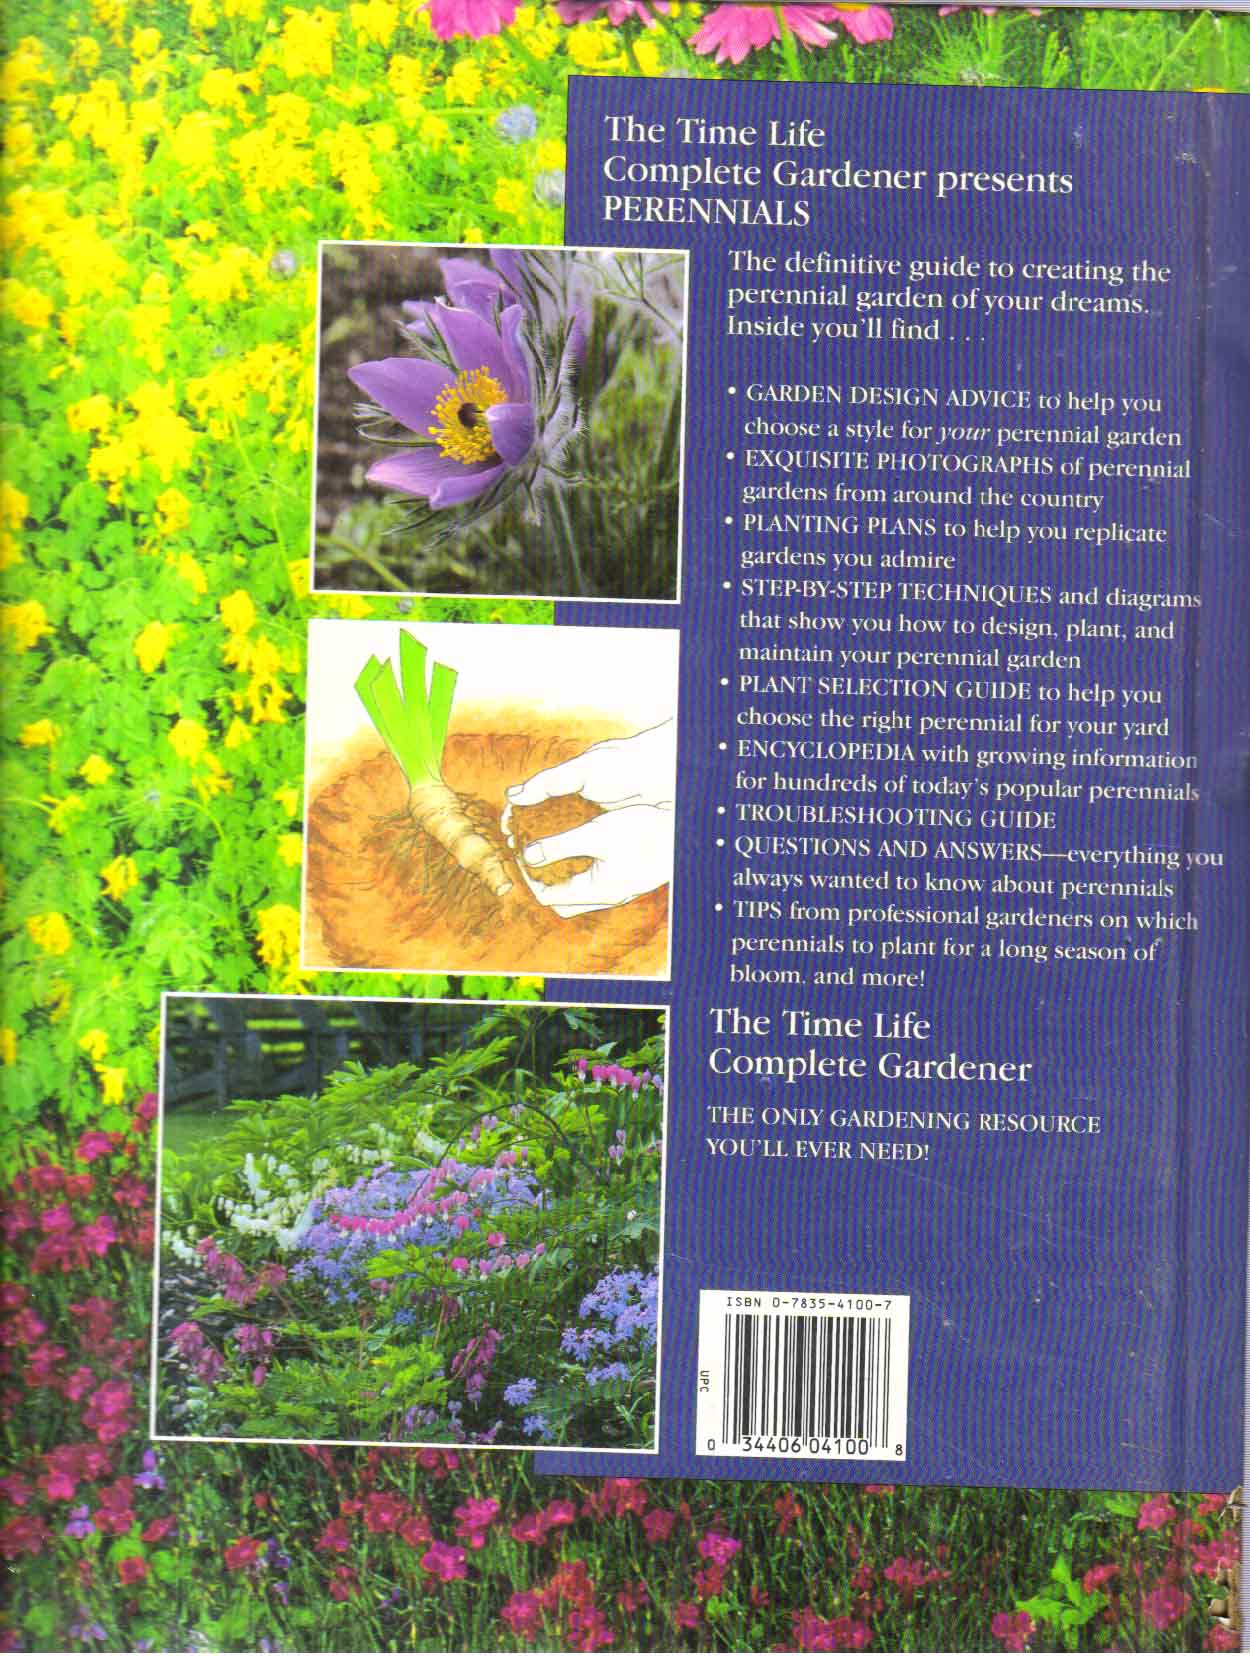 The Time Life Complete Gardener Perennials